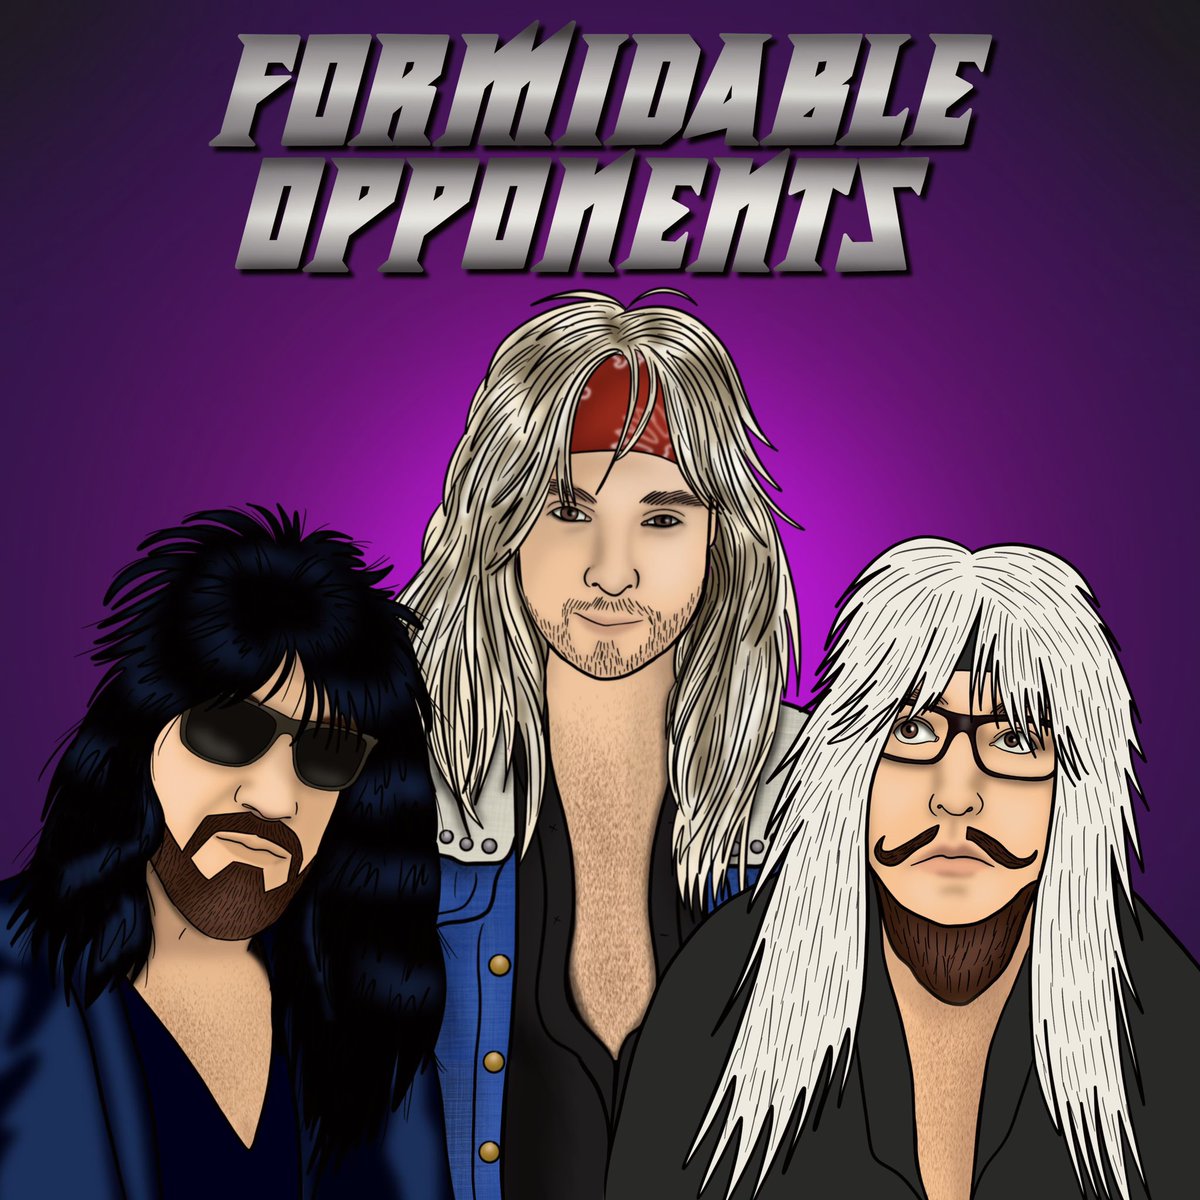 New Episode Now Available!  Check out, “Most Overrated 80s Band” anywhere you listen to #podcasts 
#podcast #newepisode #80s #music #comedy
#80music #hairmetal #popculture #nostalgia #throwback #mtv #commentary #debate #retro #formidableopponents